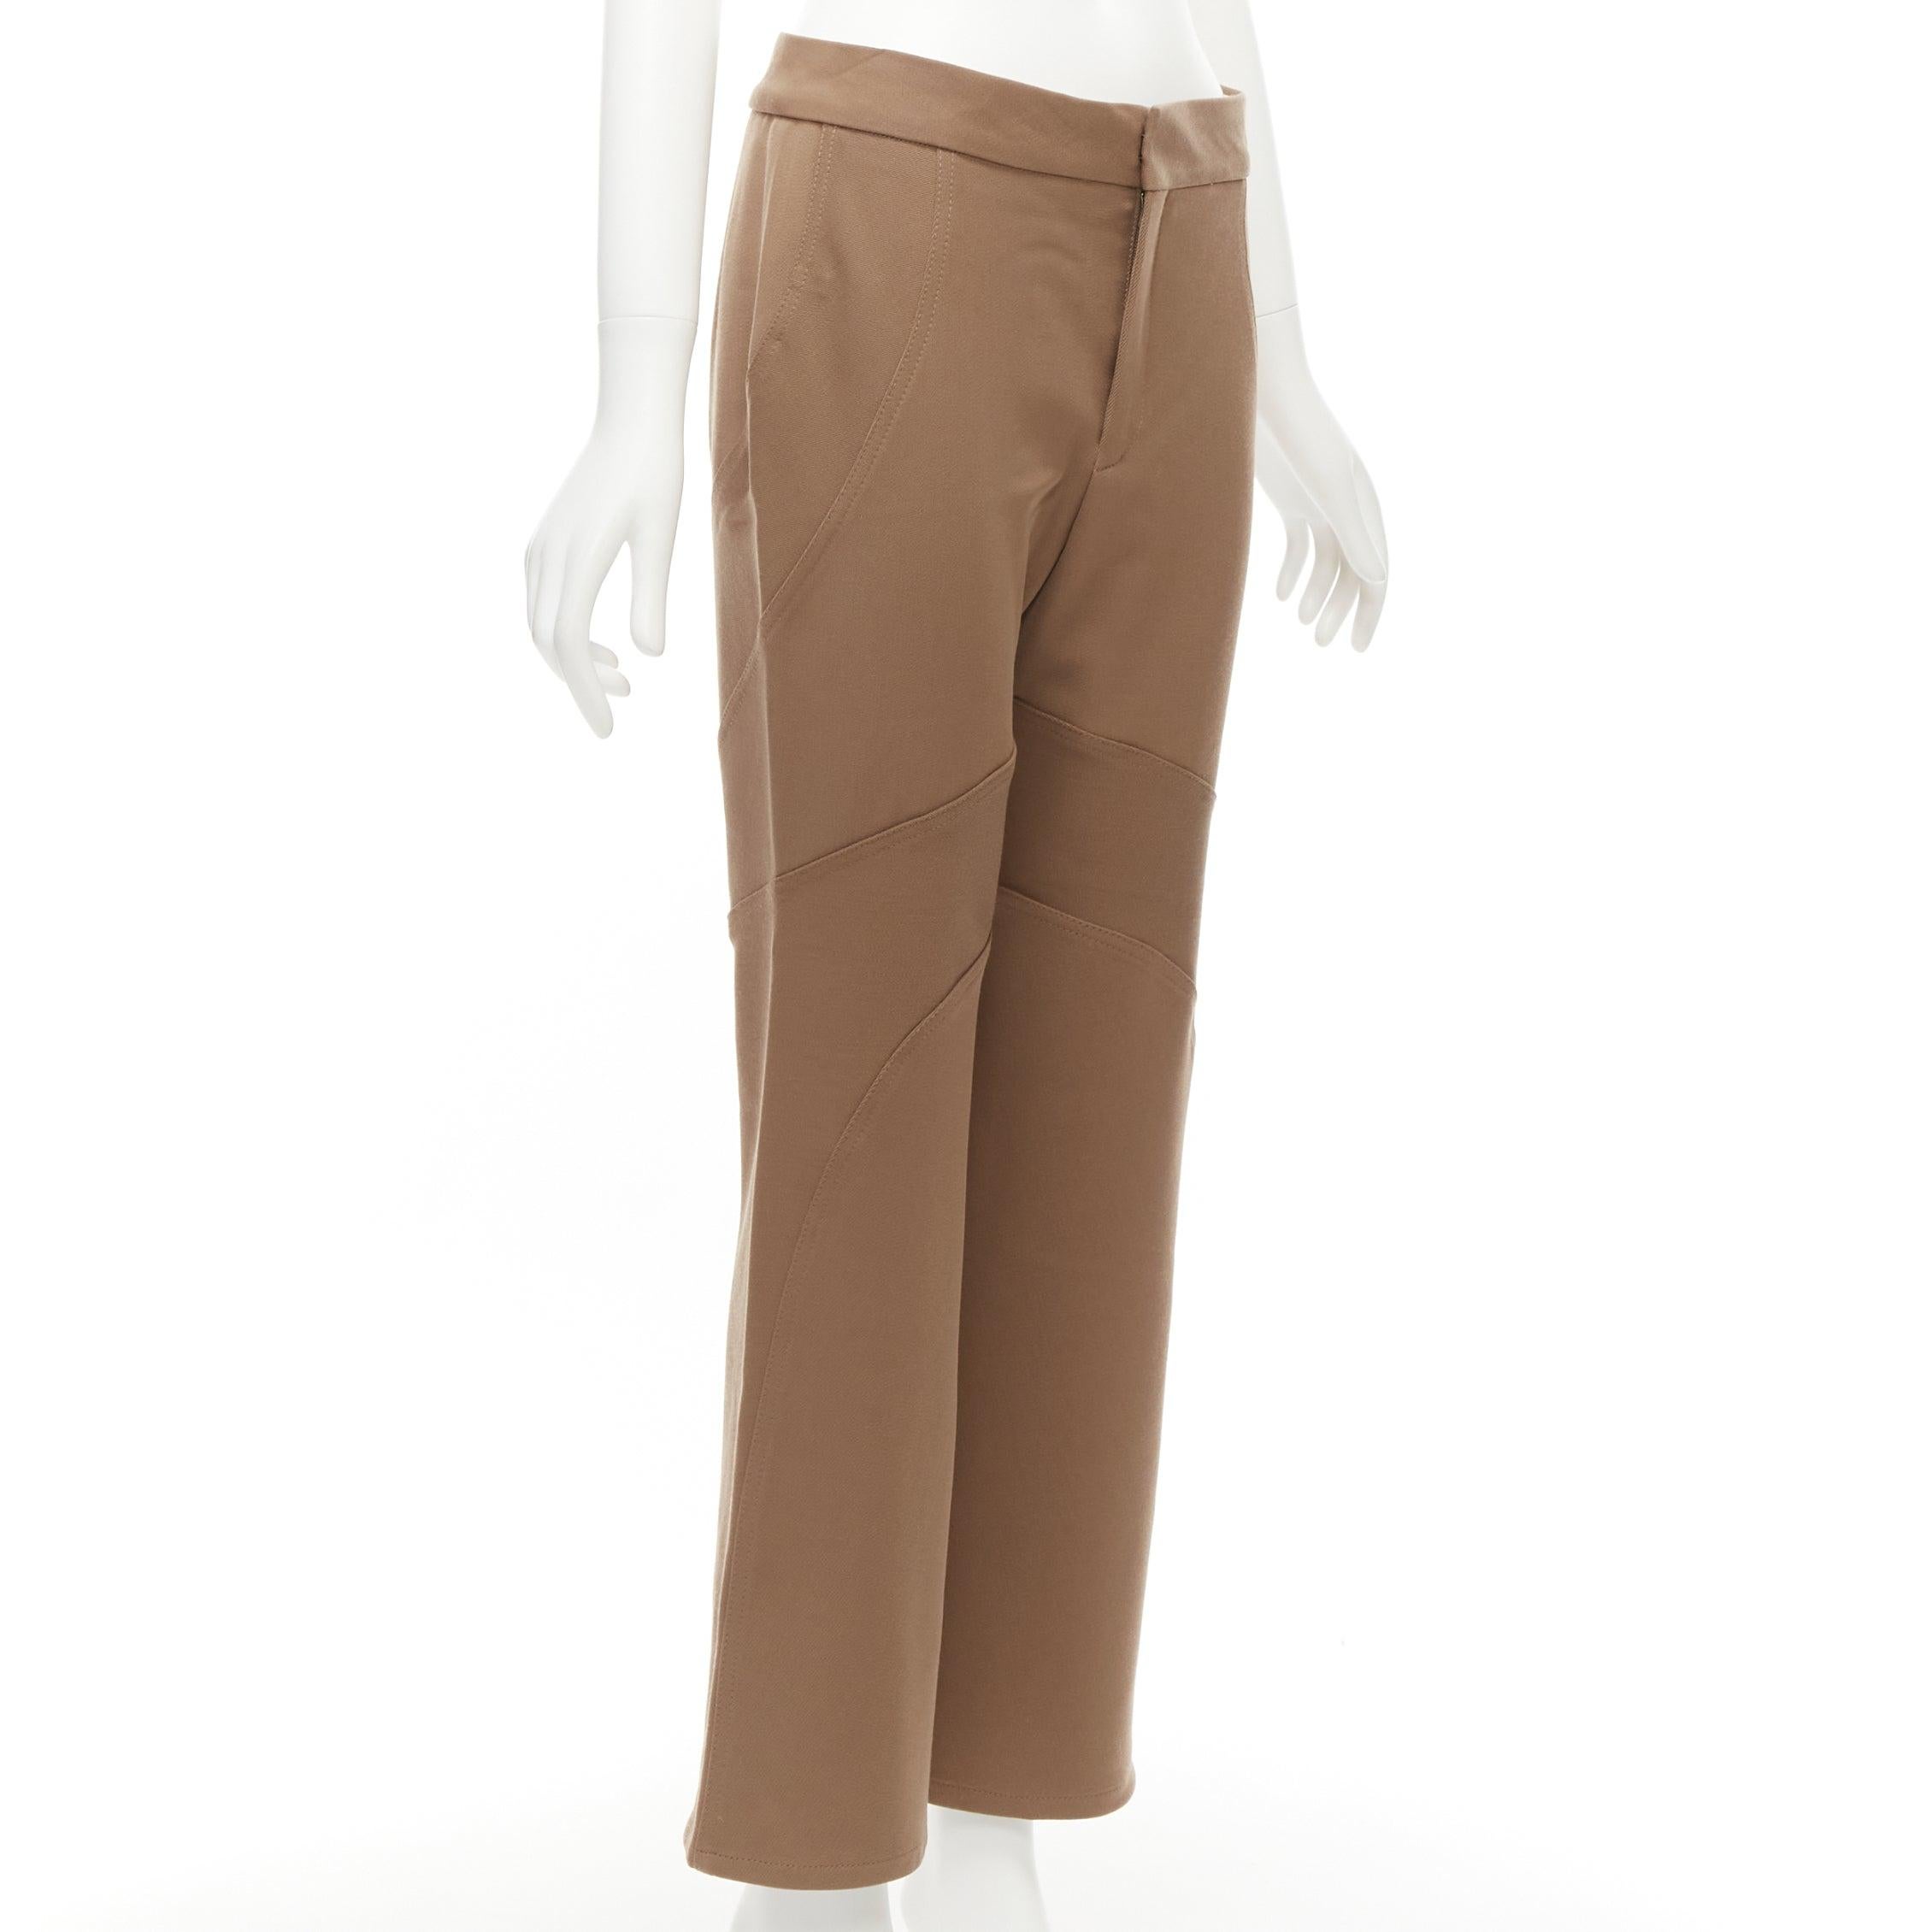 MARNI brown virgin wool blend curved panelled flared trousers IT38 XS
Reference: CELG/A00253
Brand: Marni
Material: Virgin Wool, Blend
Color: Brown
Pattern: Solid
Closure: Zip Fly
Made in: Italy

CONDITION:
Condition: Excellent, this item was